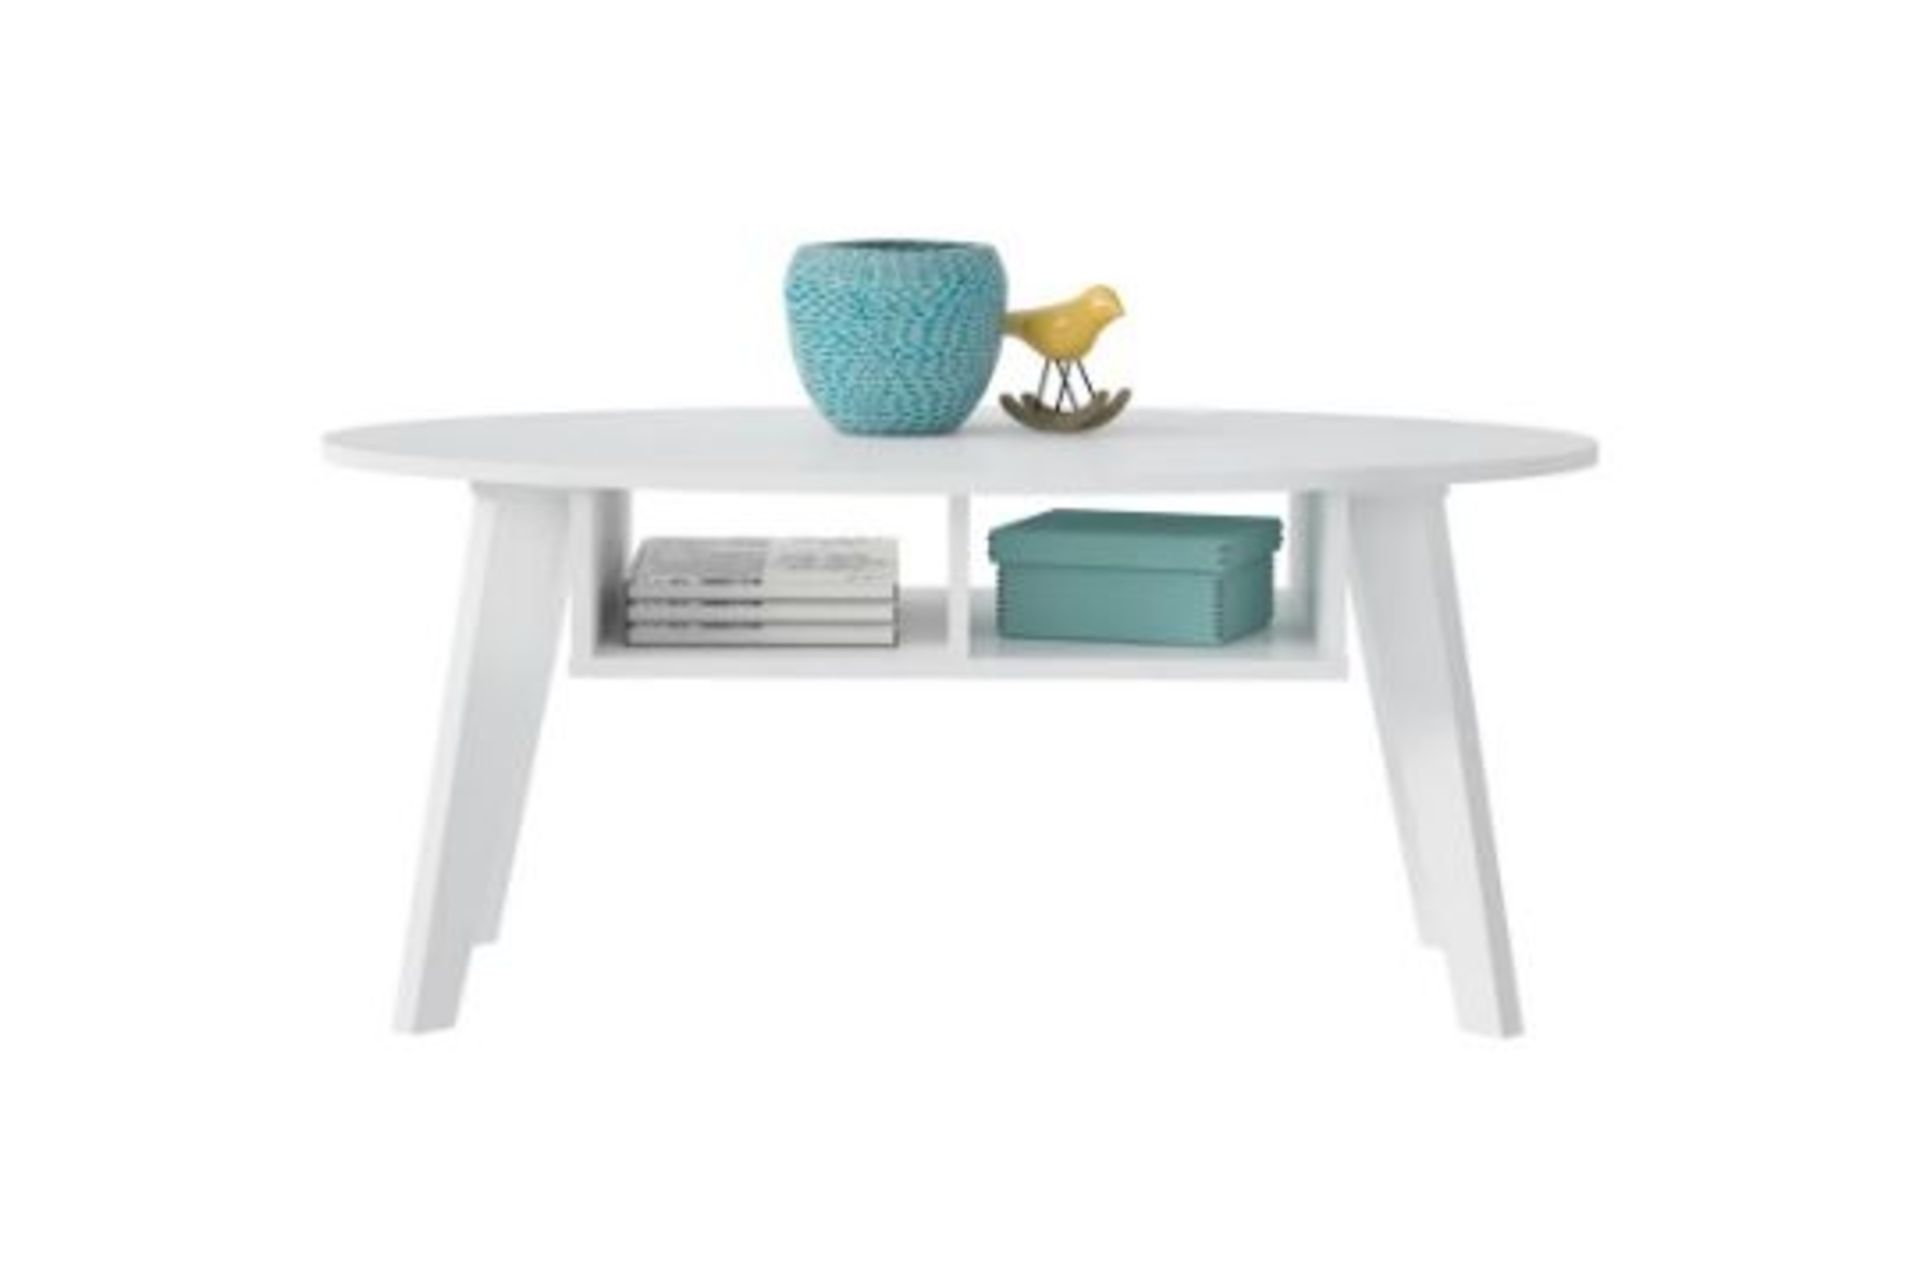 RRP £83.99 - Haillee 4 Legs Coffee Table with Storage - Image 2 of 3